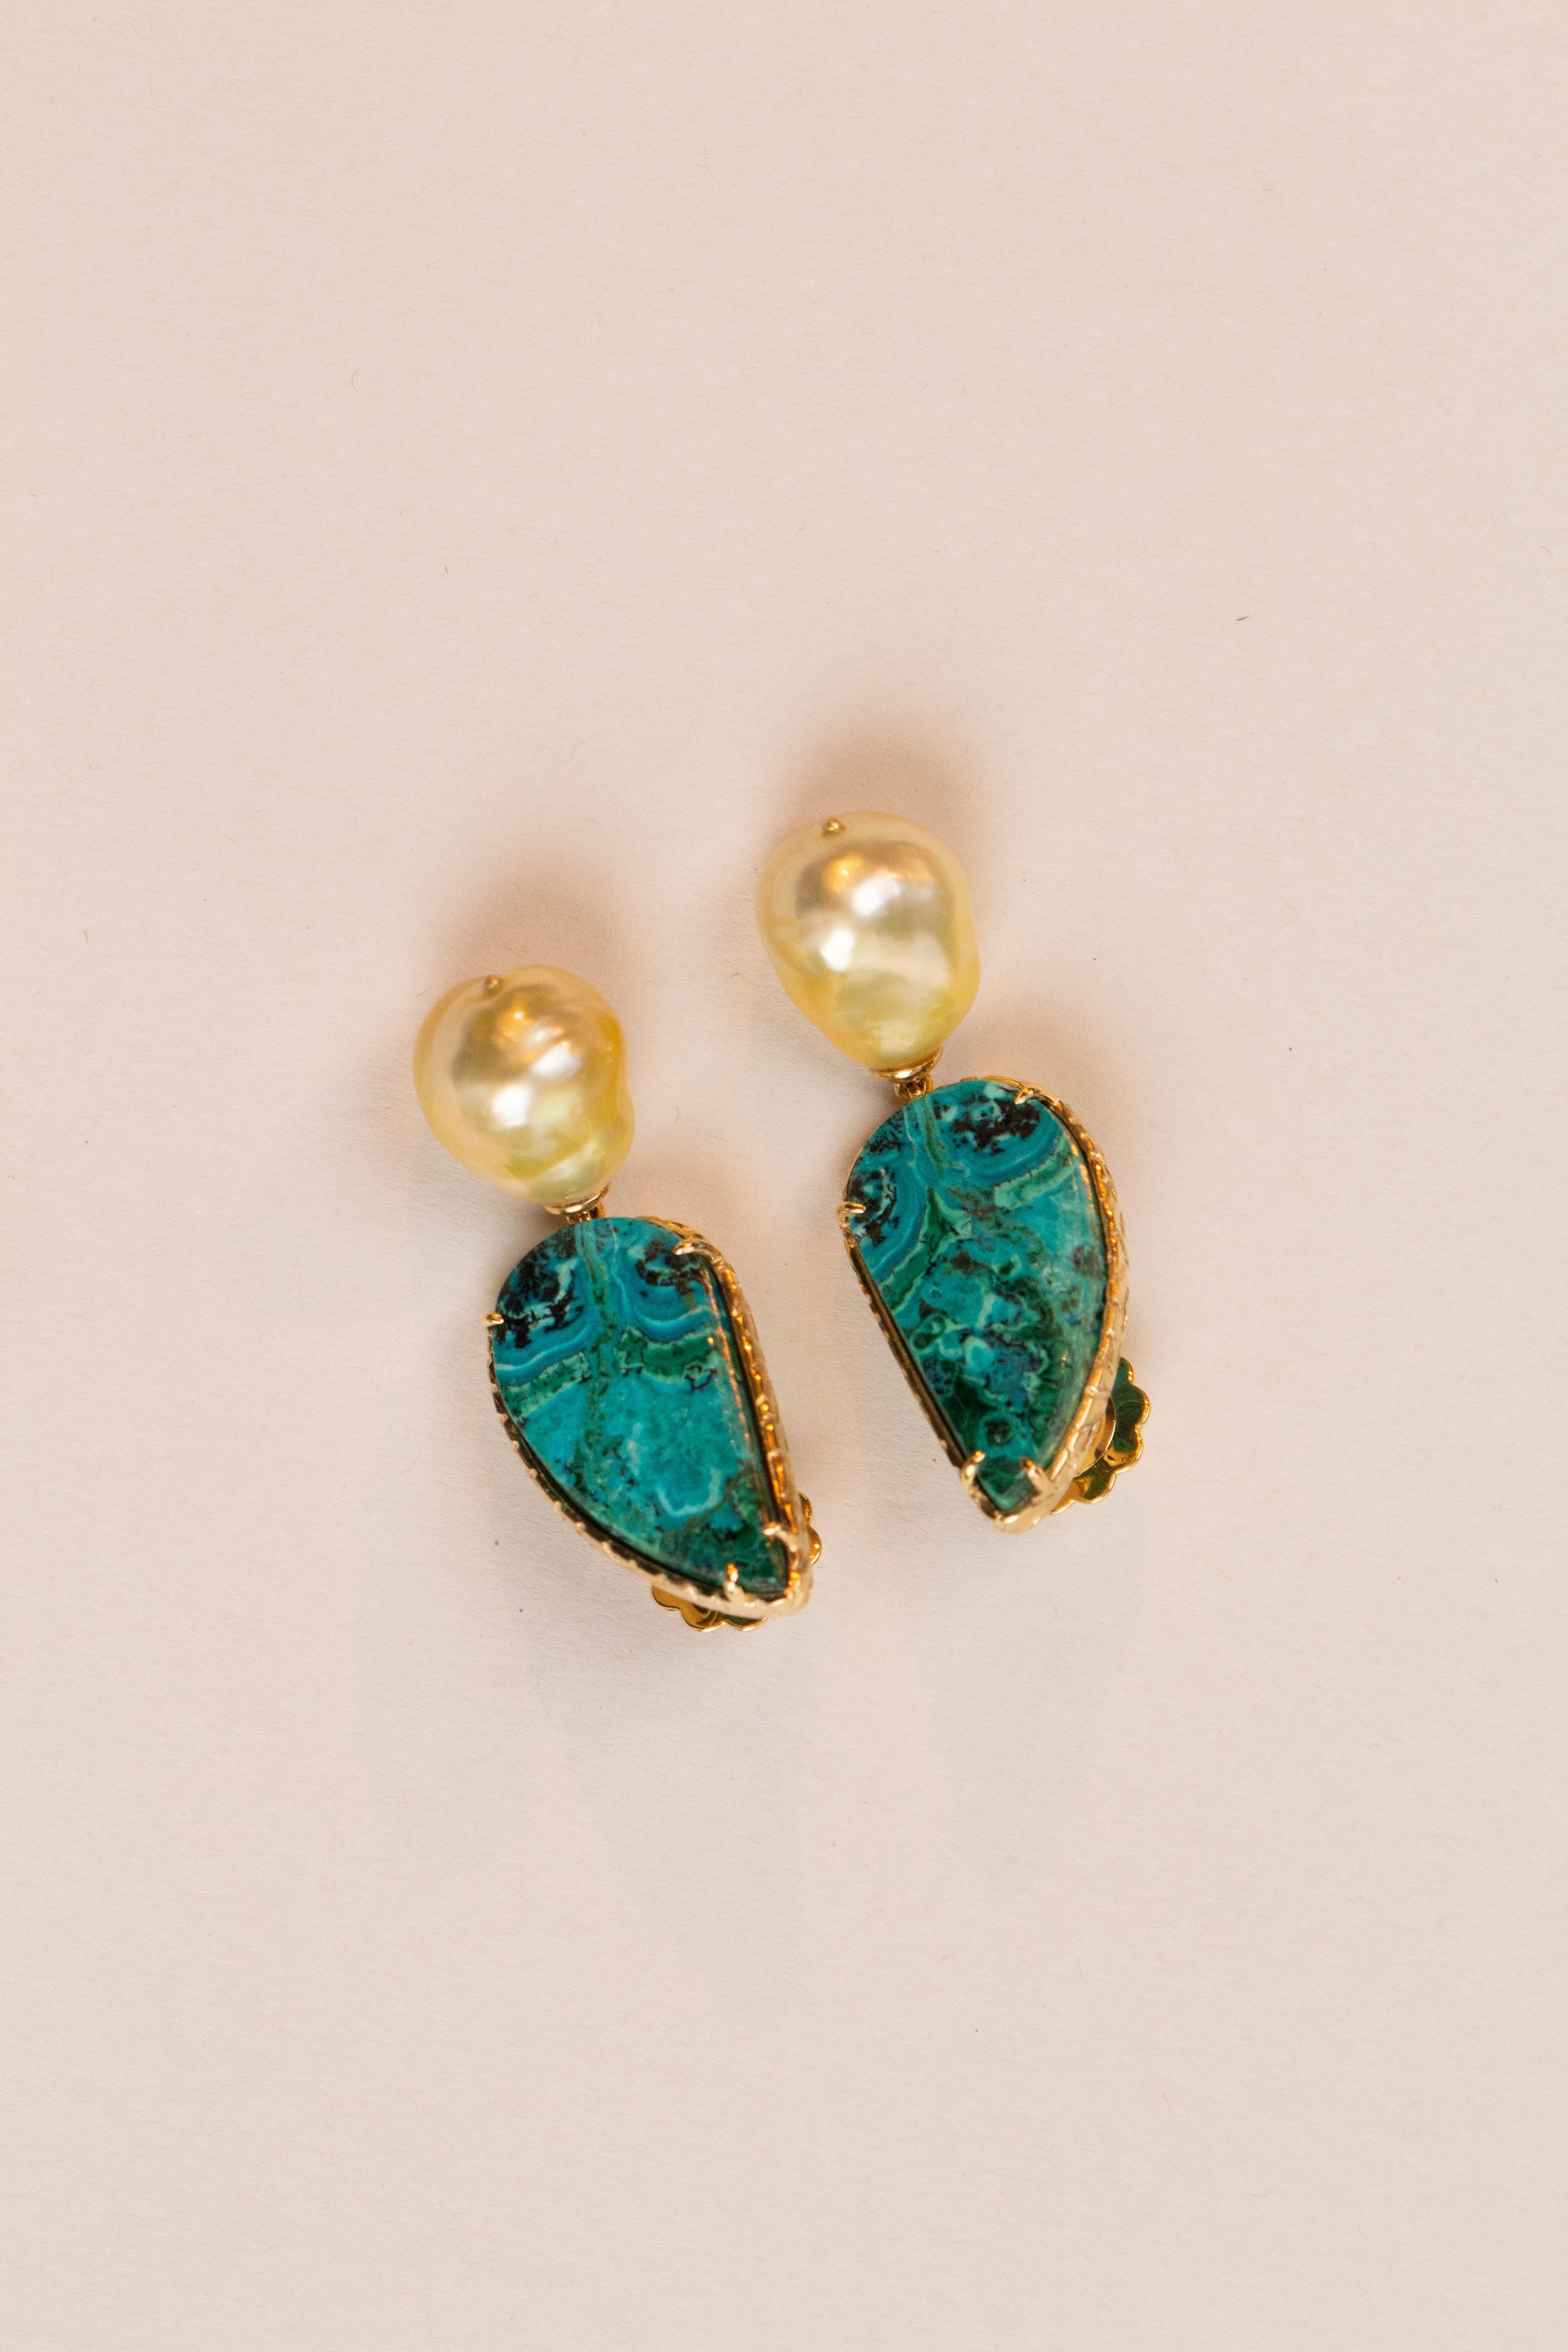 Triangular cut azzurrite and Gold natural Pearls earrings, 18k gold gr 7,80.
All Giulia Colussi jewelry is new and has never been previously owned or worn. Each item will arrive at your door beautifully gift wrapped in our boxes, put inside an